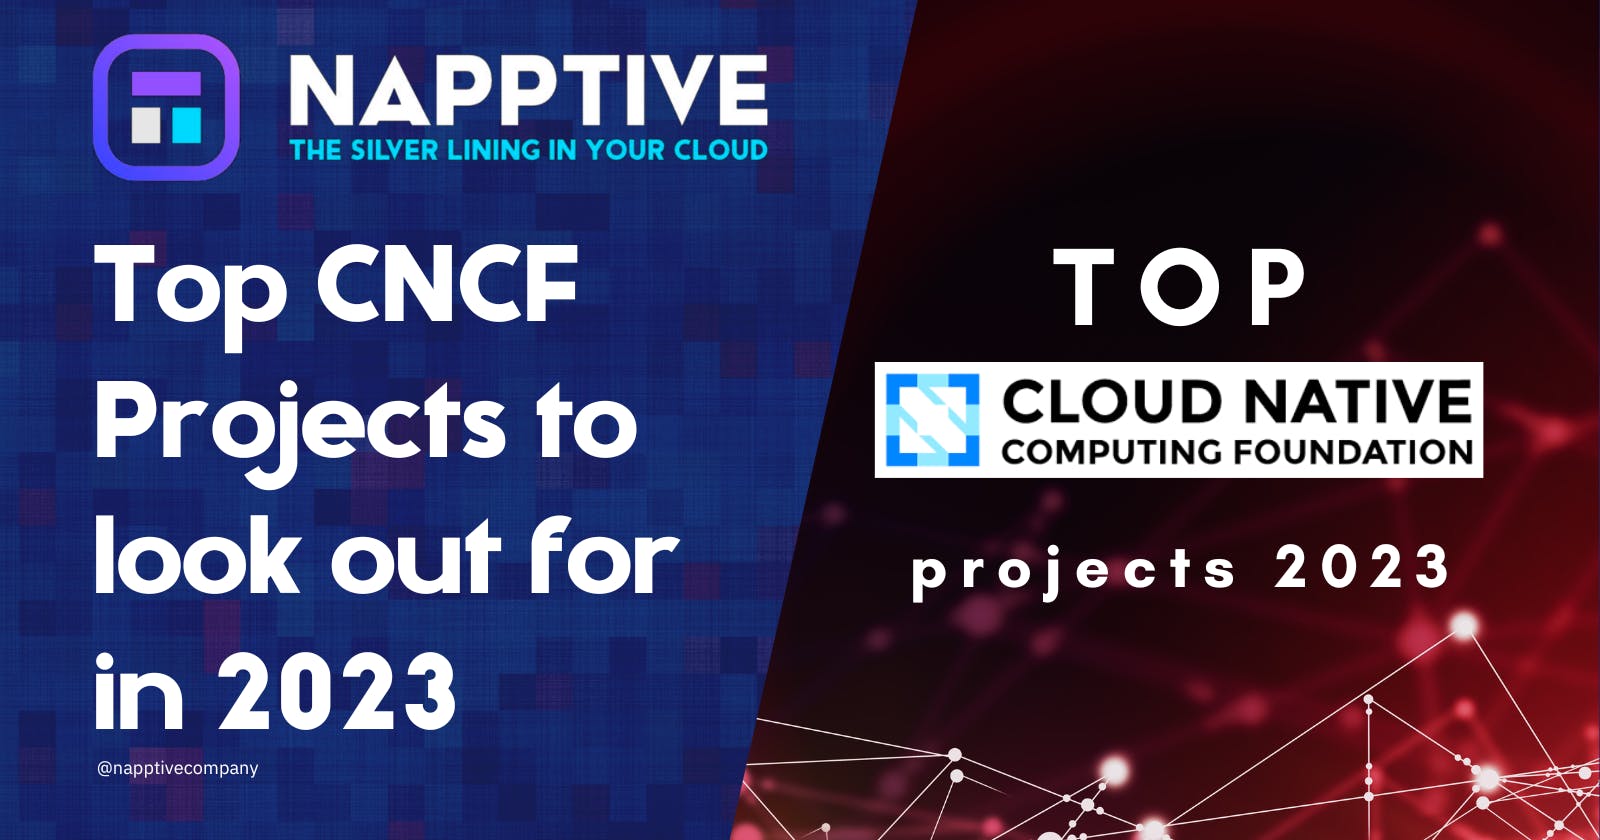 Top CNCF Projects to look out for in 2023